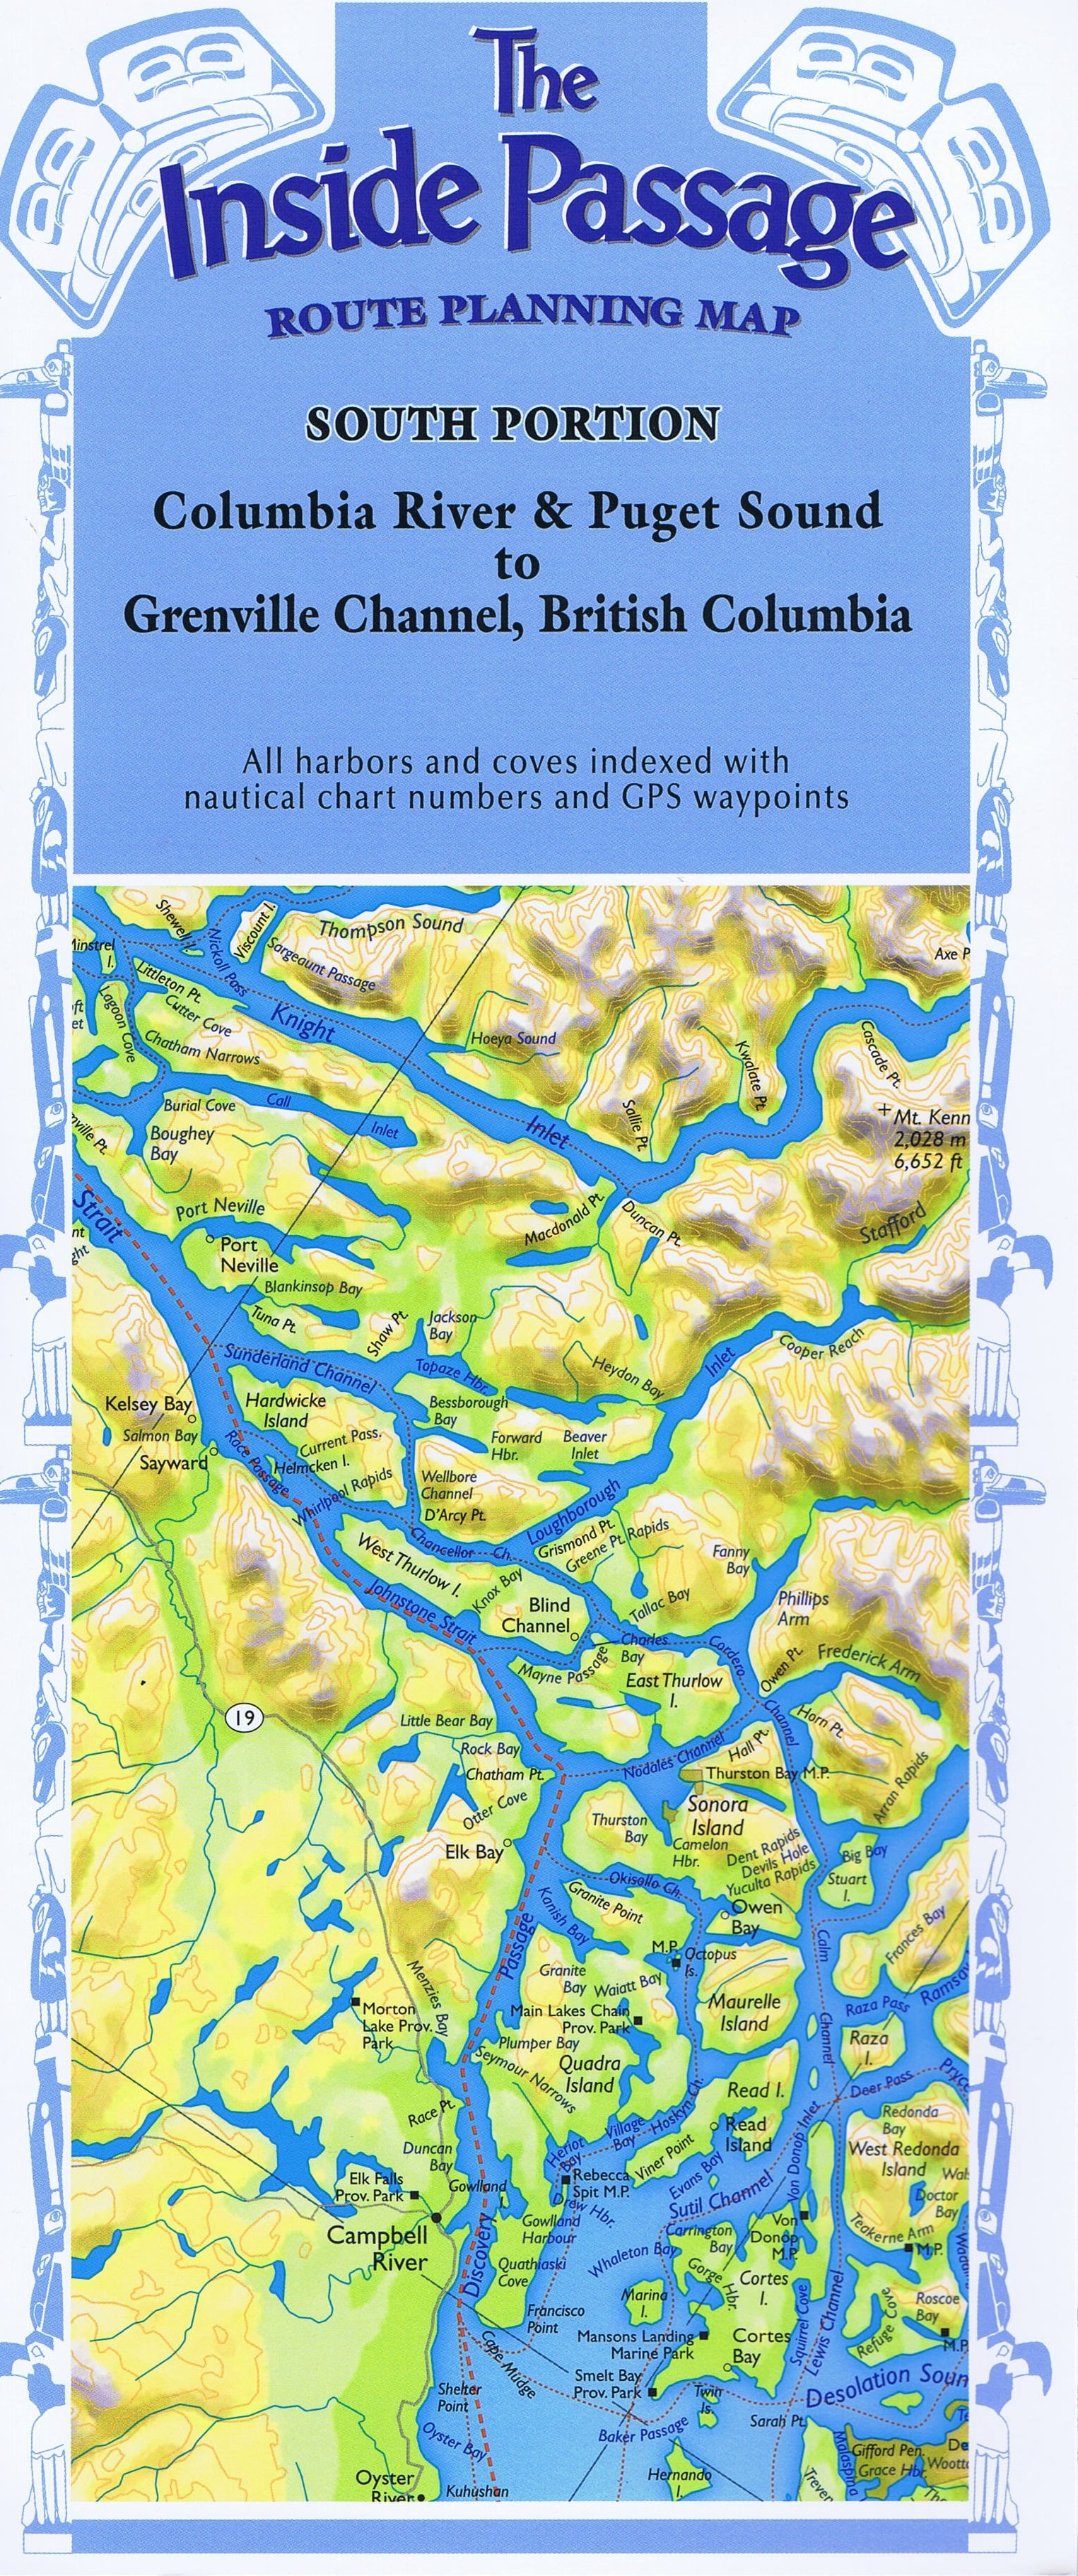 Numbers On Nautical Charts